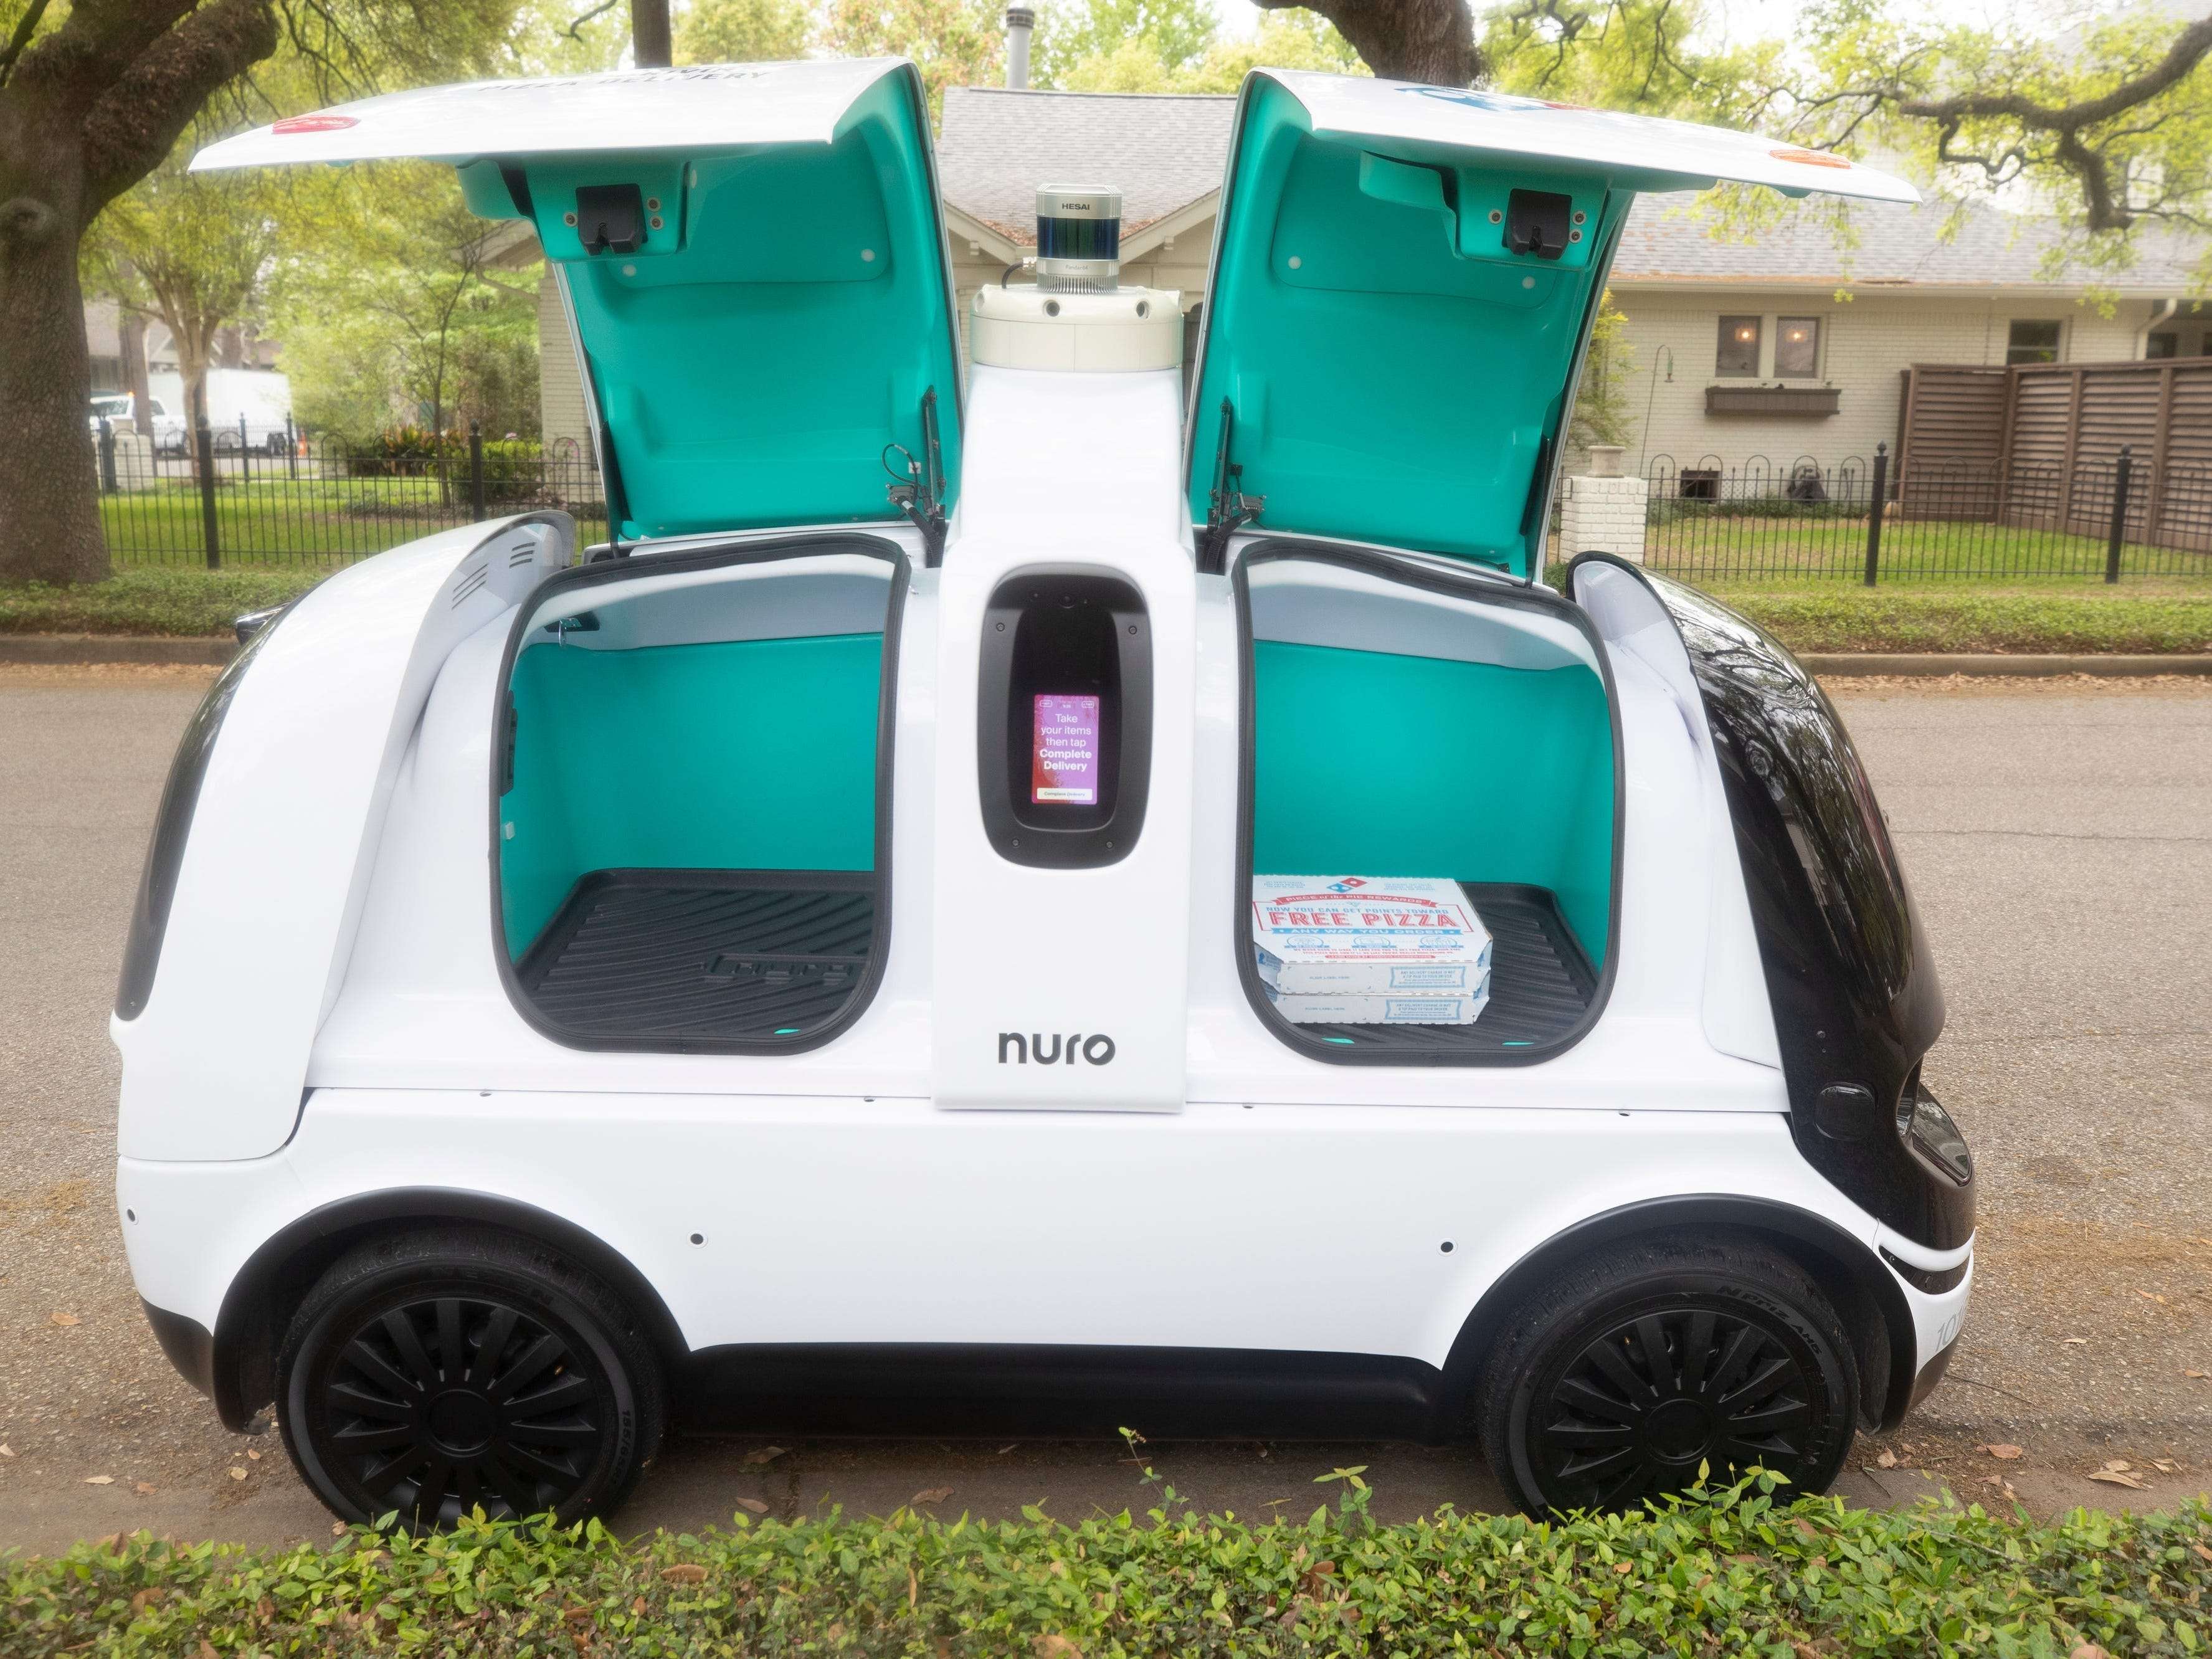 Domino's is launching autonomous pizza delivery with a tiny self